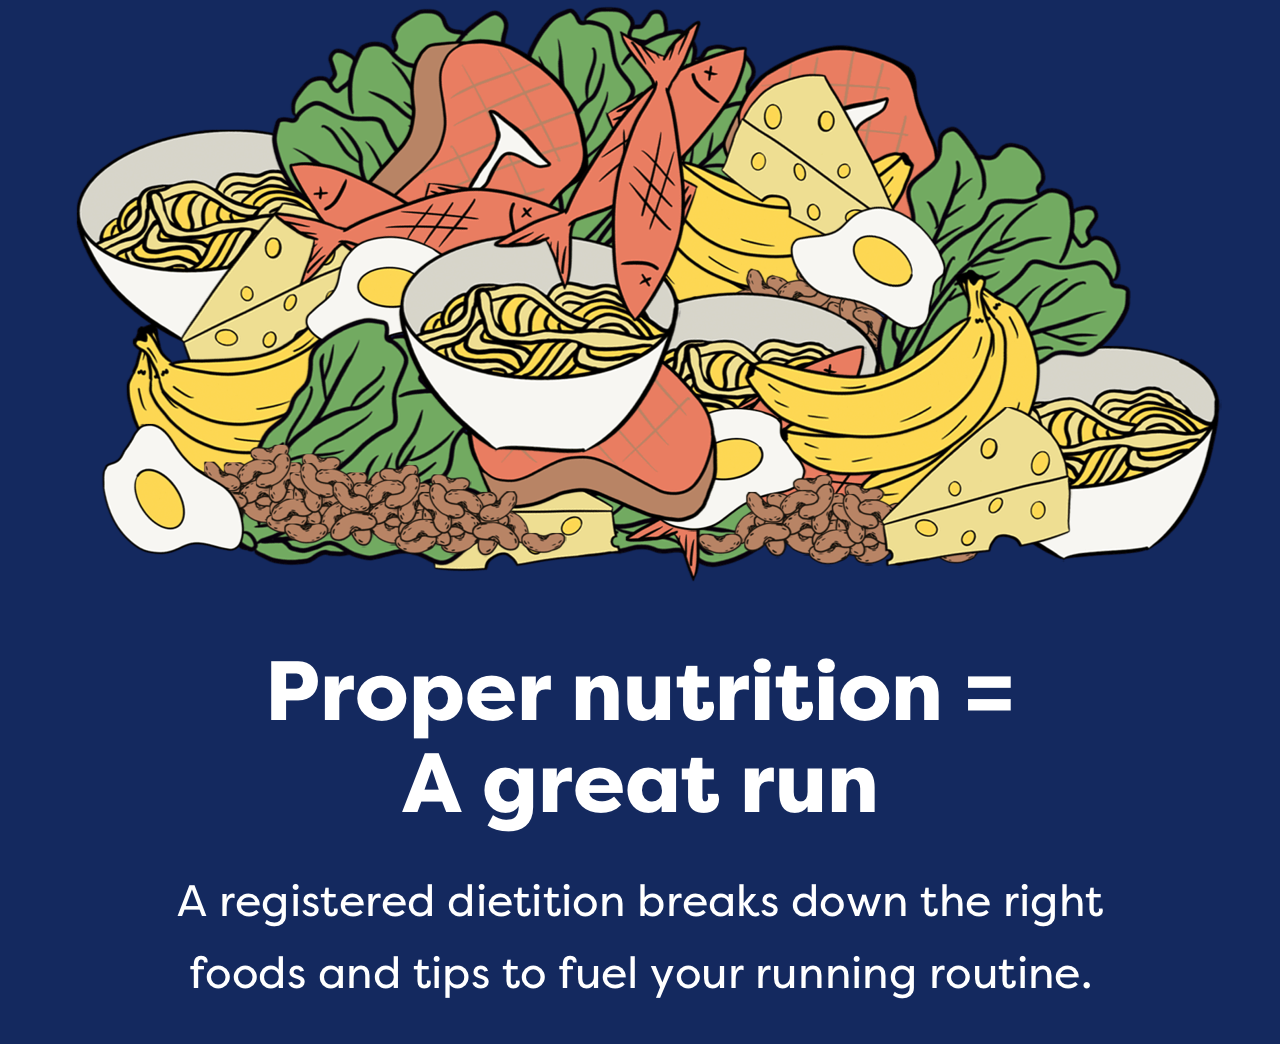 Proper nutrition = A great run - A registered dietition breaks down the right foods and tips to fuel your running routine.